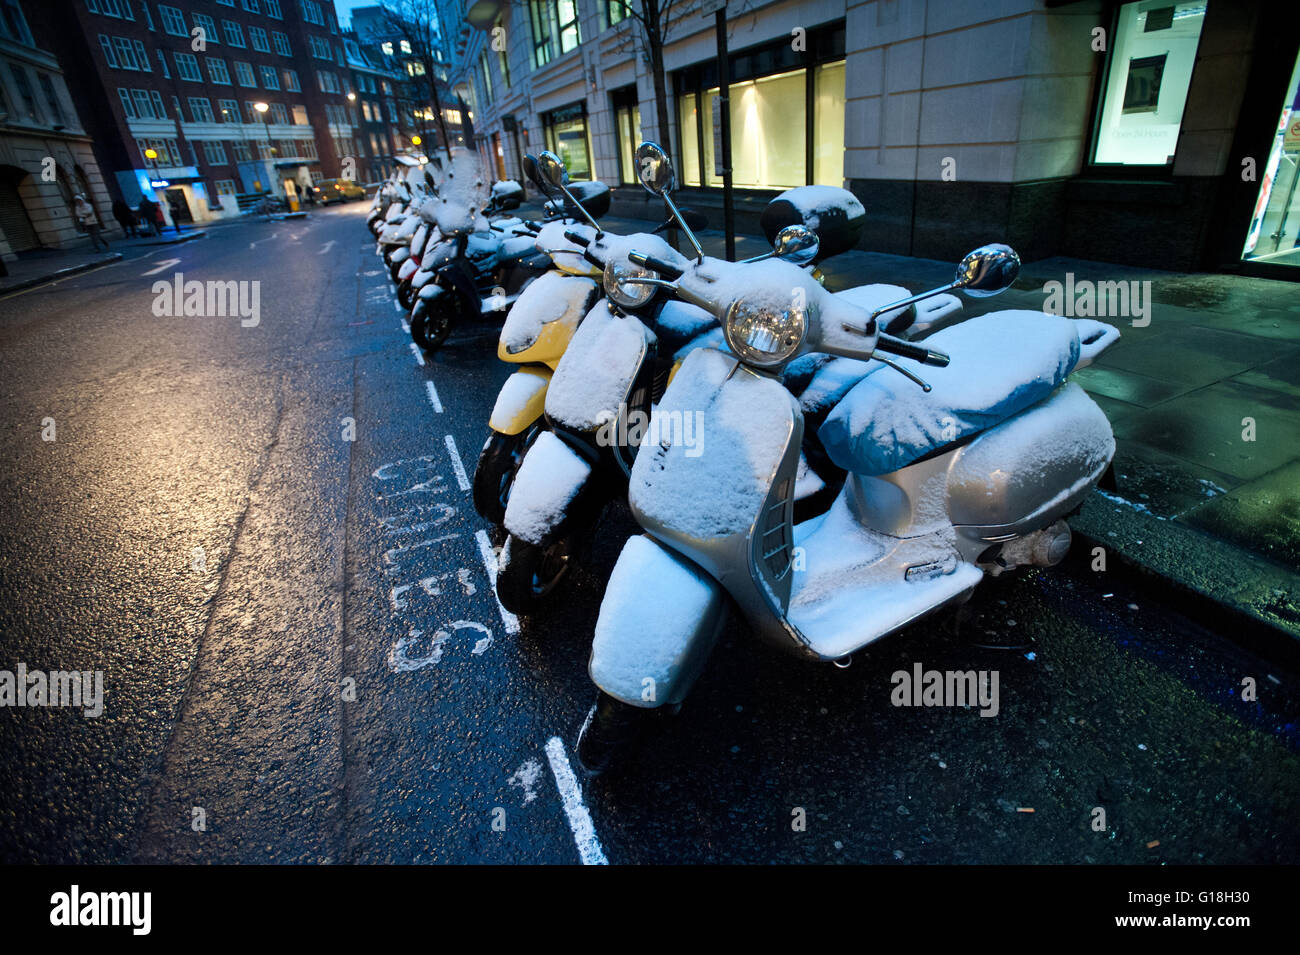 Schnee-Scooter am Berkeley Square, London West End Stockfoto